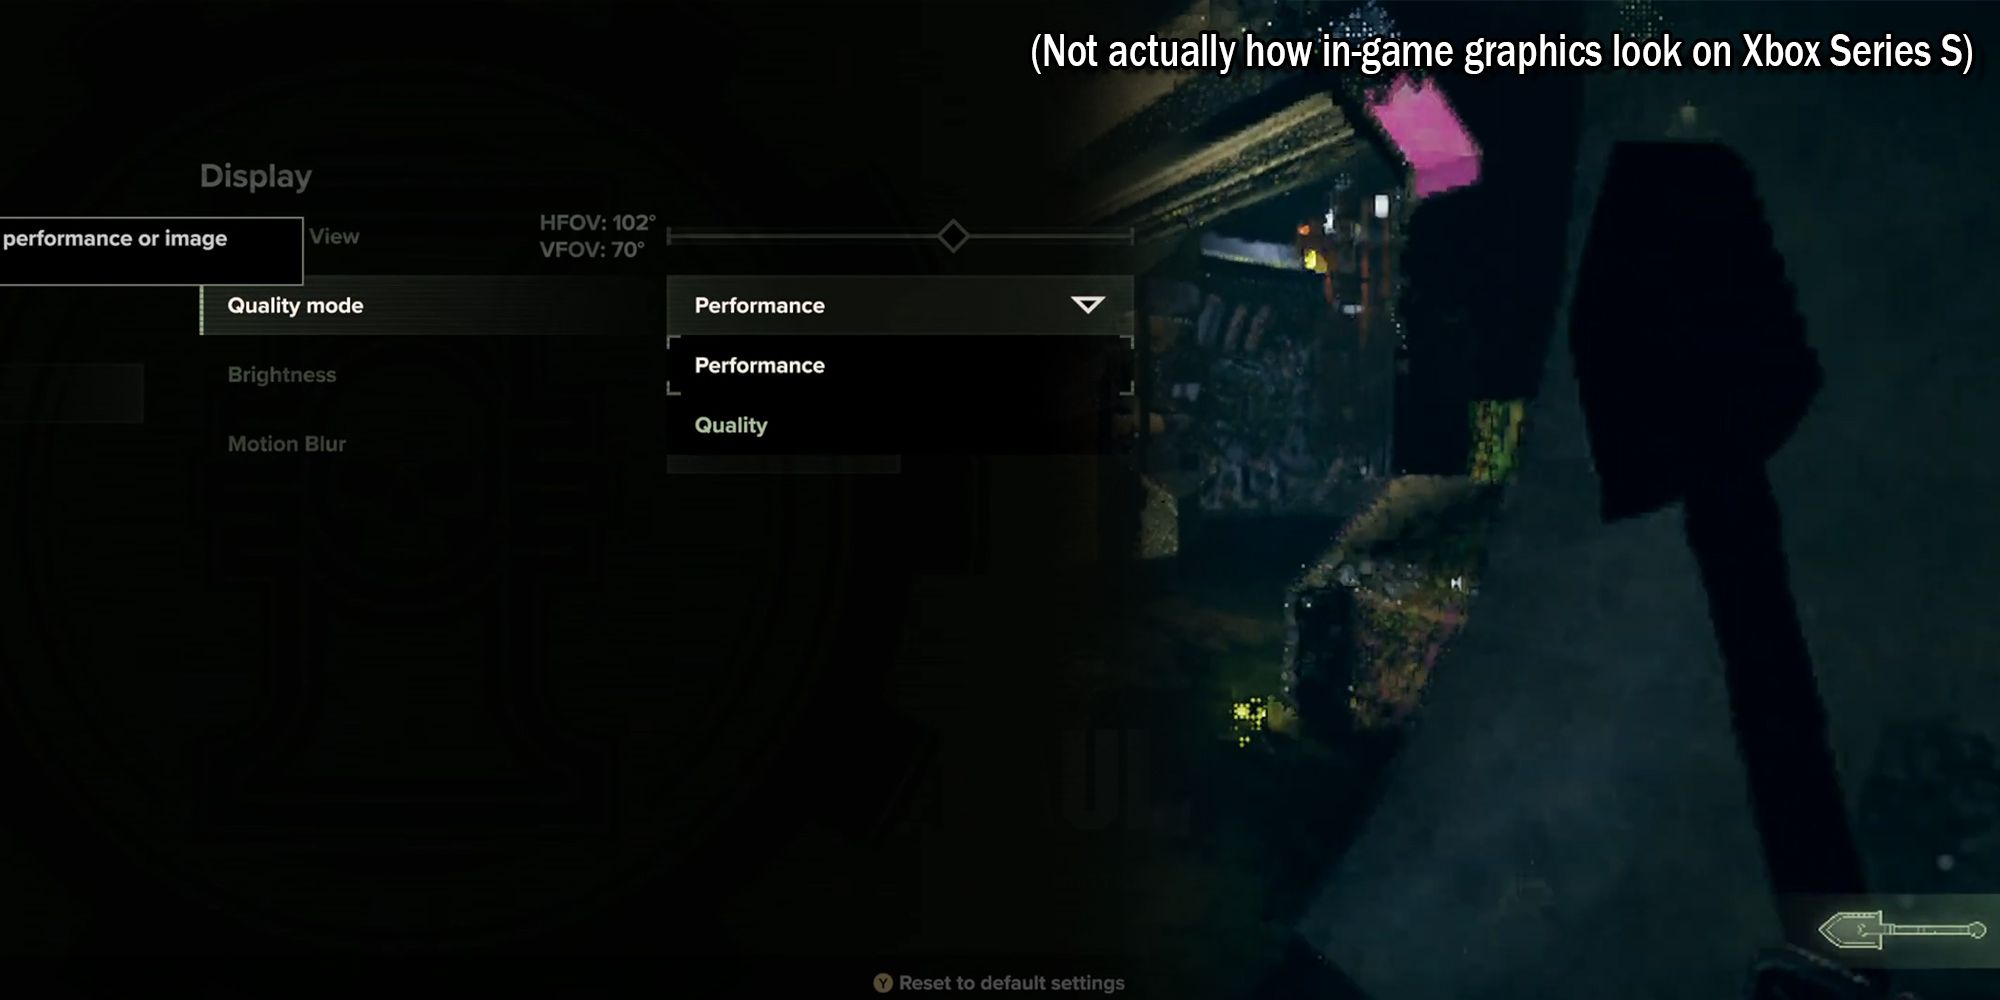 Darktide - Performance Mode On Console Next To Joke Image Of Modded Extra Low Graphic Settings